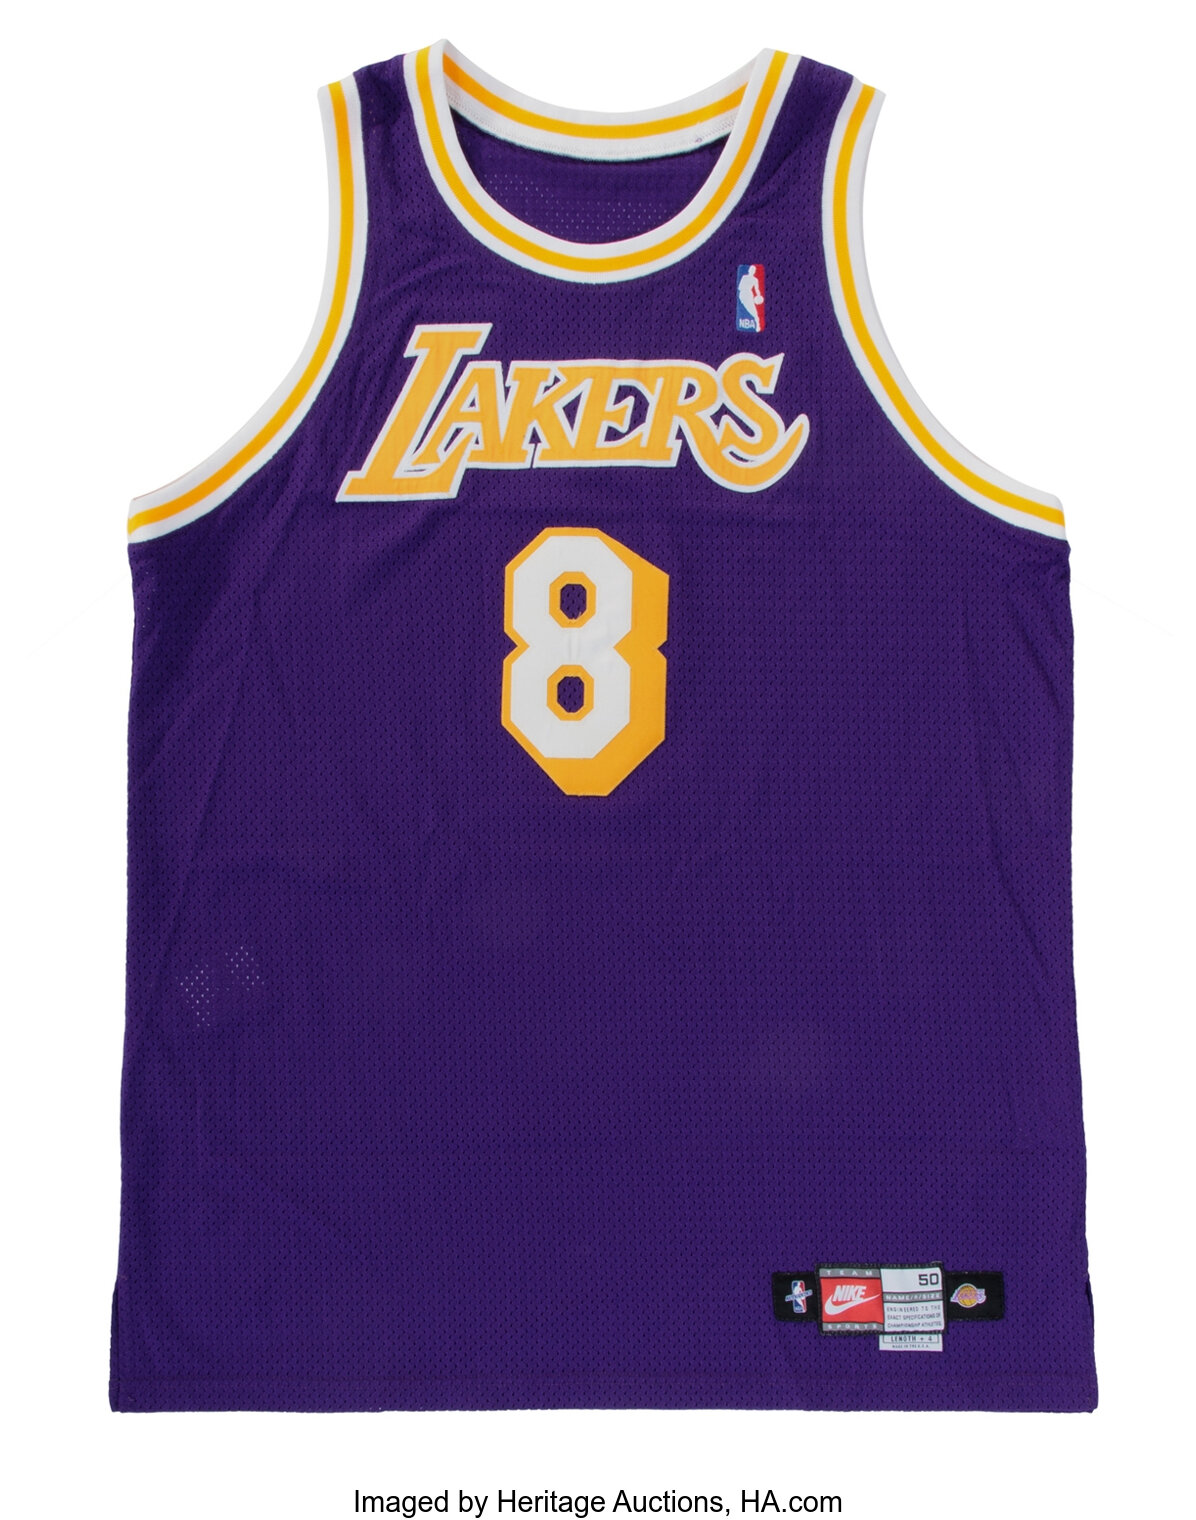 Kobe Bryant NBA Breakout Season Lakers Jersey to Be Auctioned Off